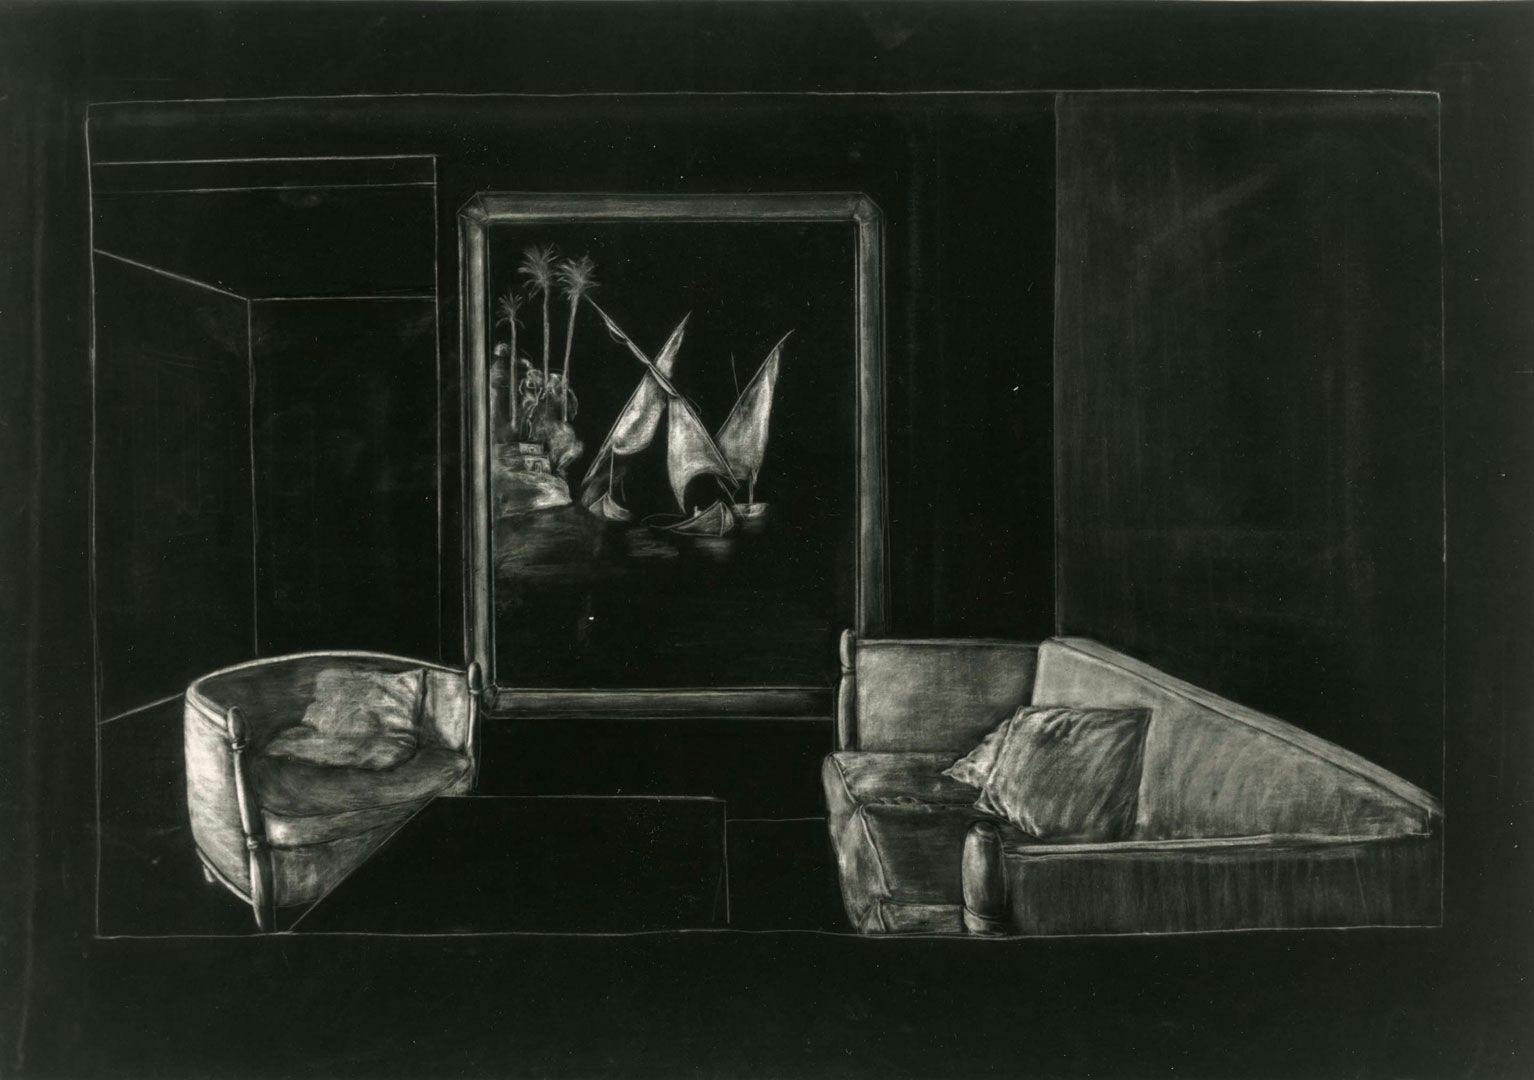 A white drawing on black paper by Juan Muñoz, titled Raincoat Drawing, dated 1989.